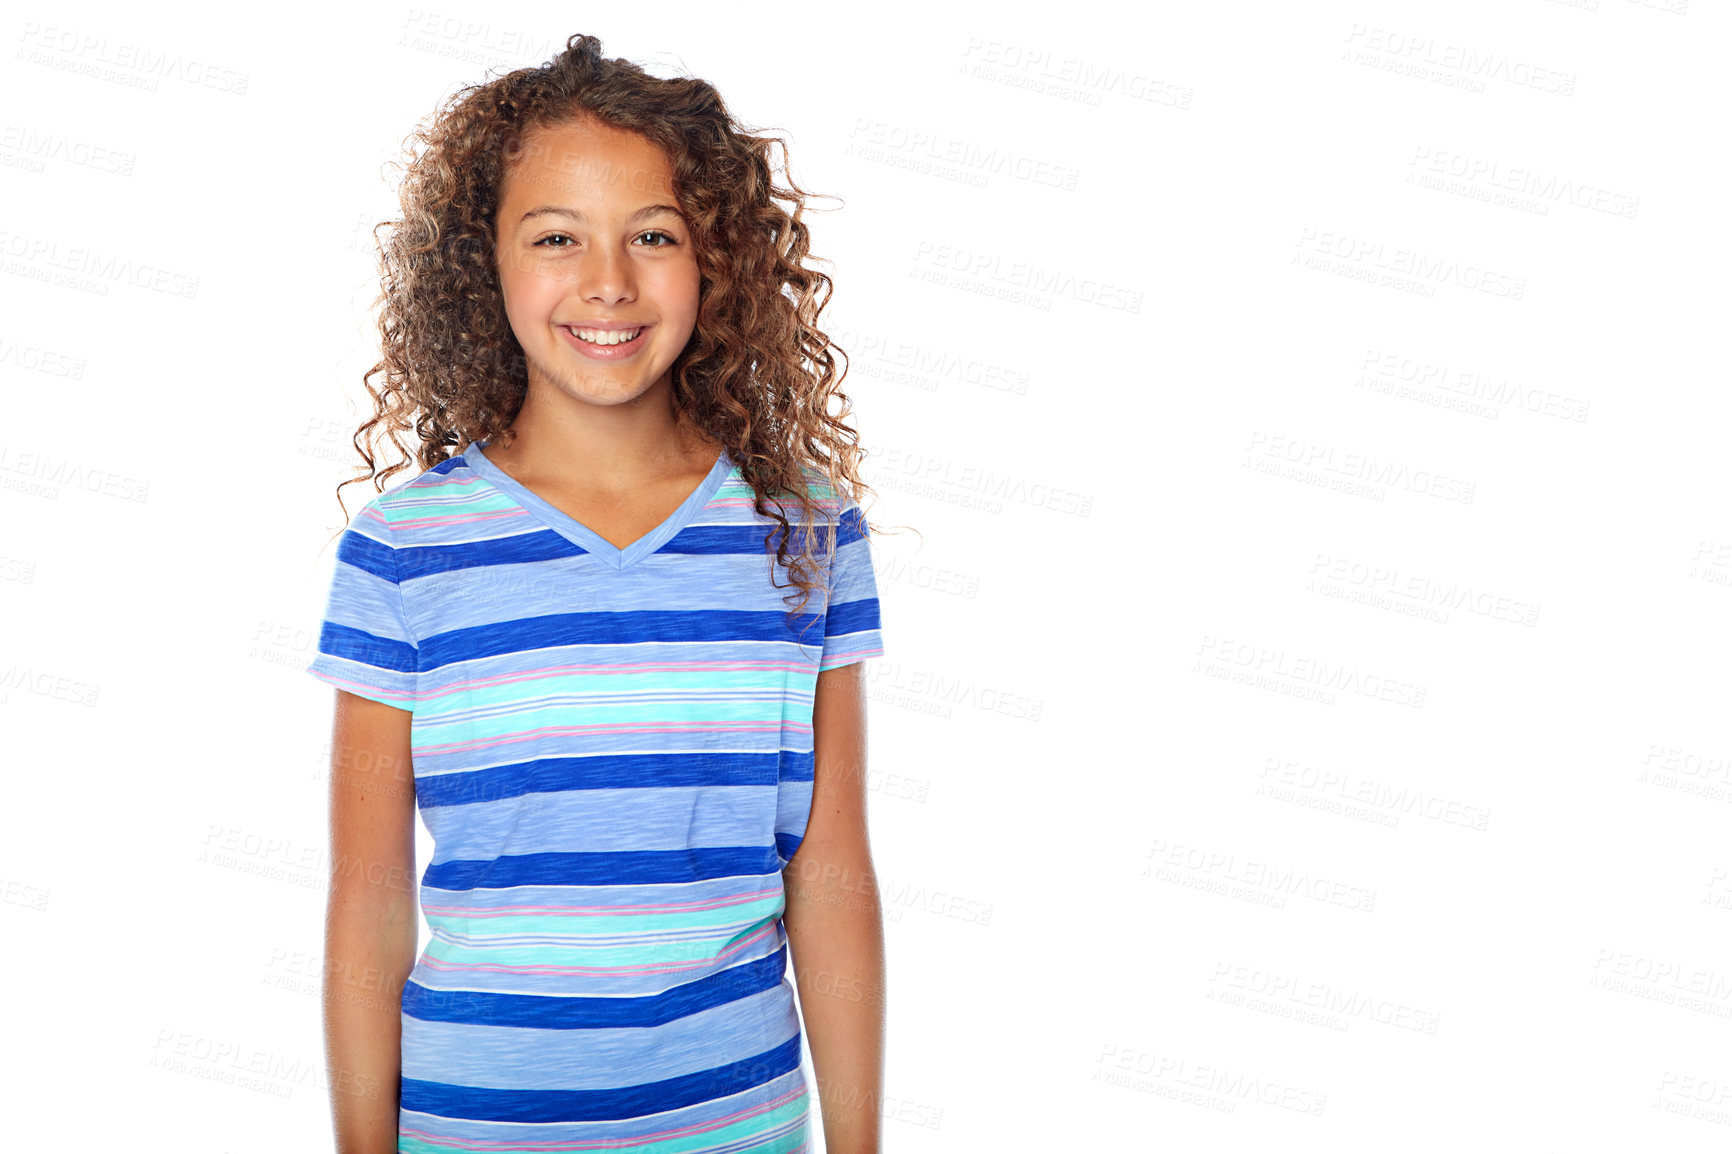 Buy stock photo Studio portrait of a young girl posing against a white background